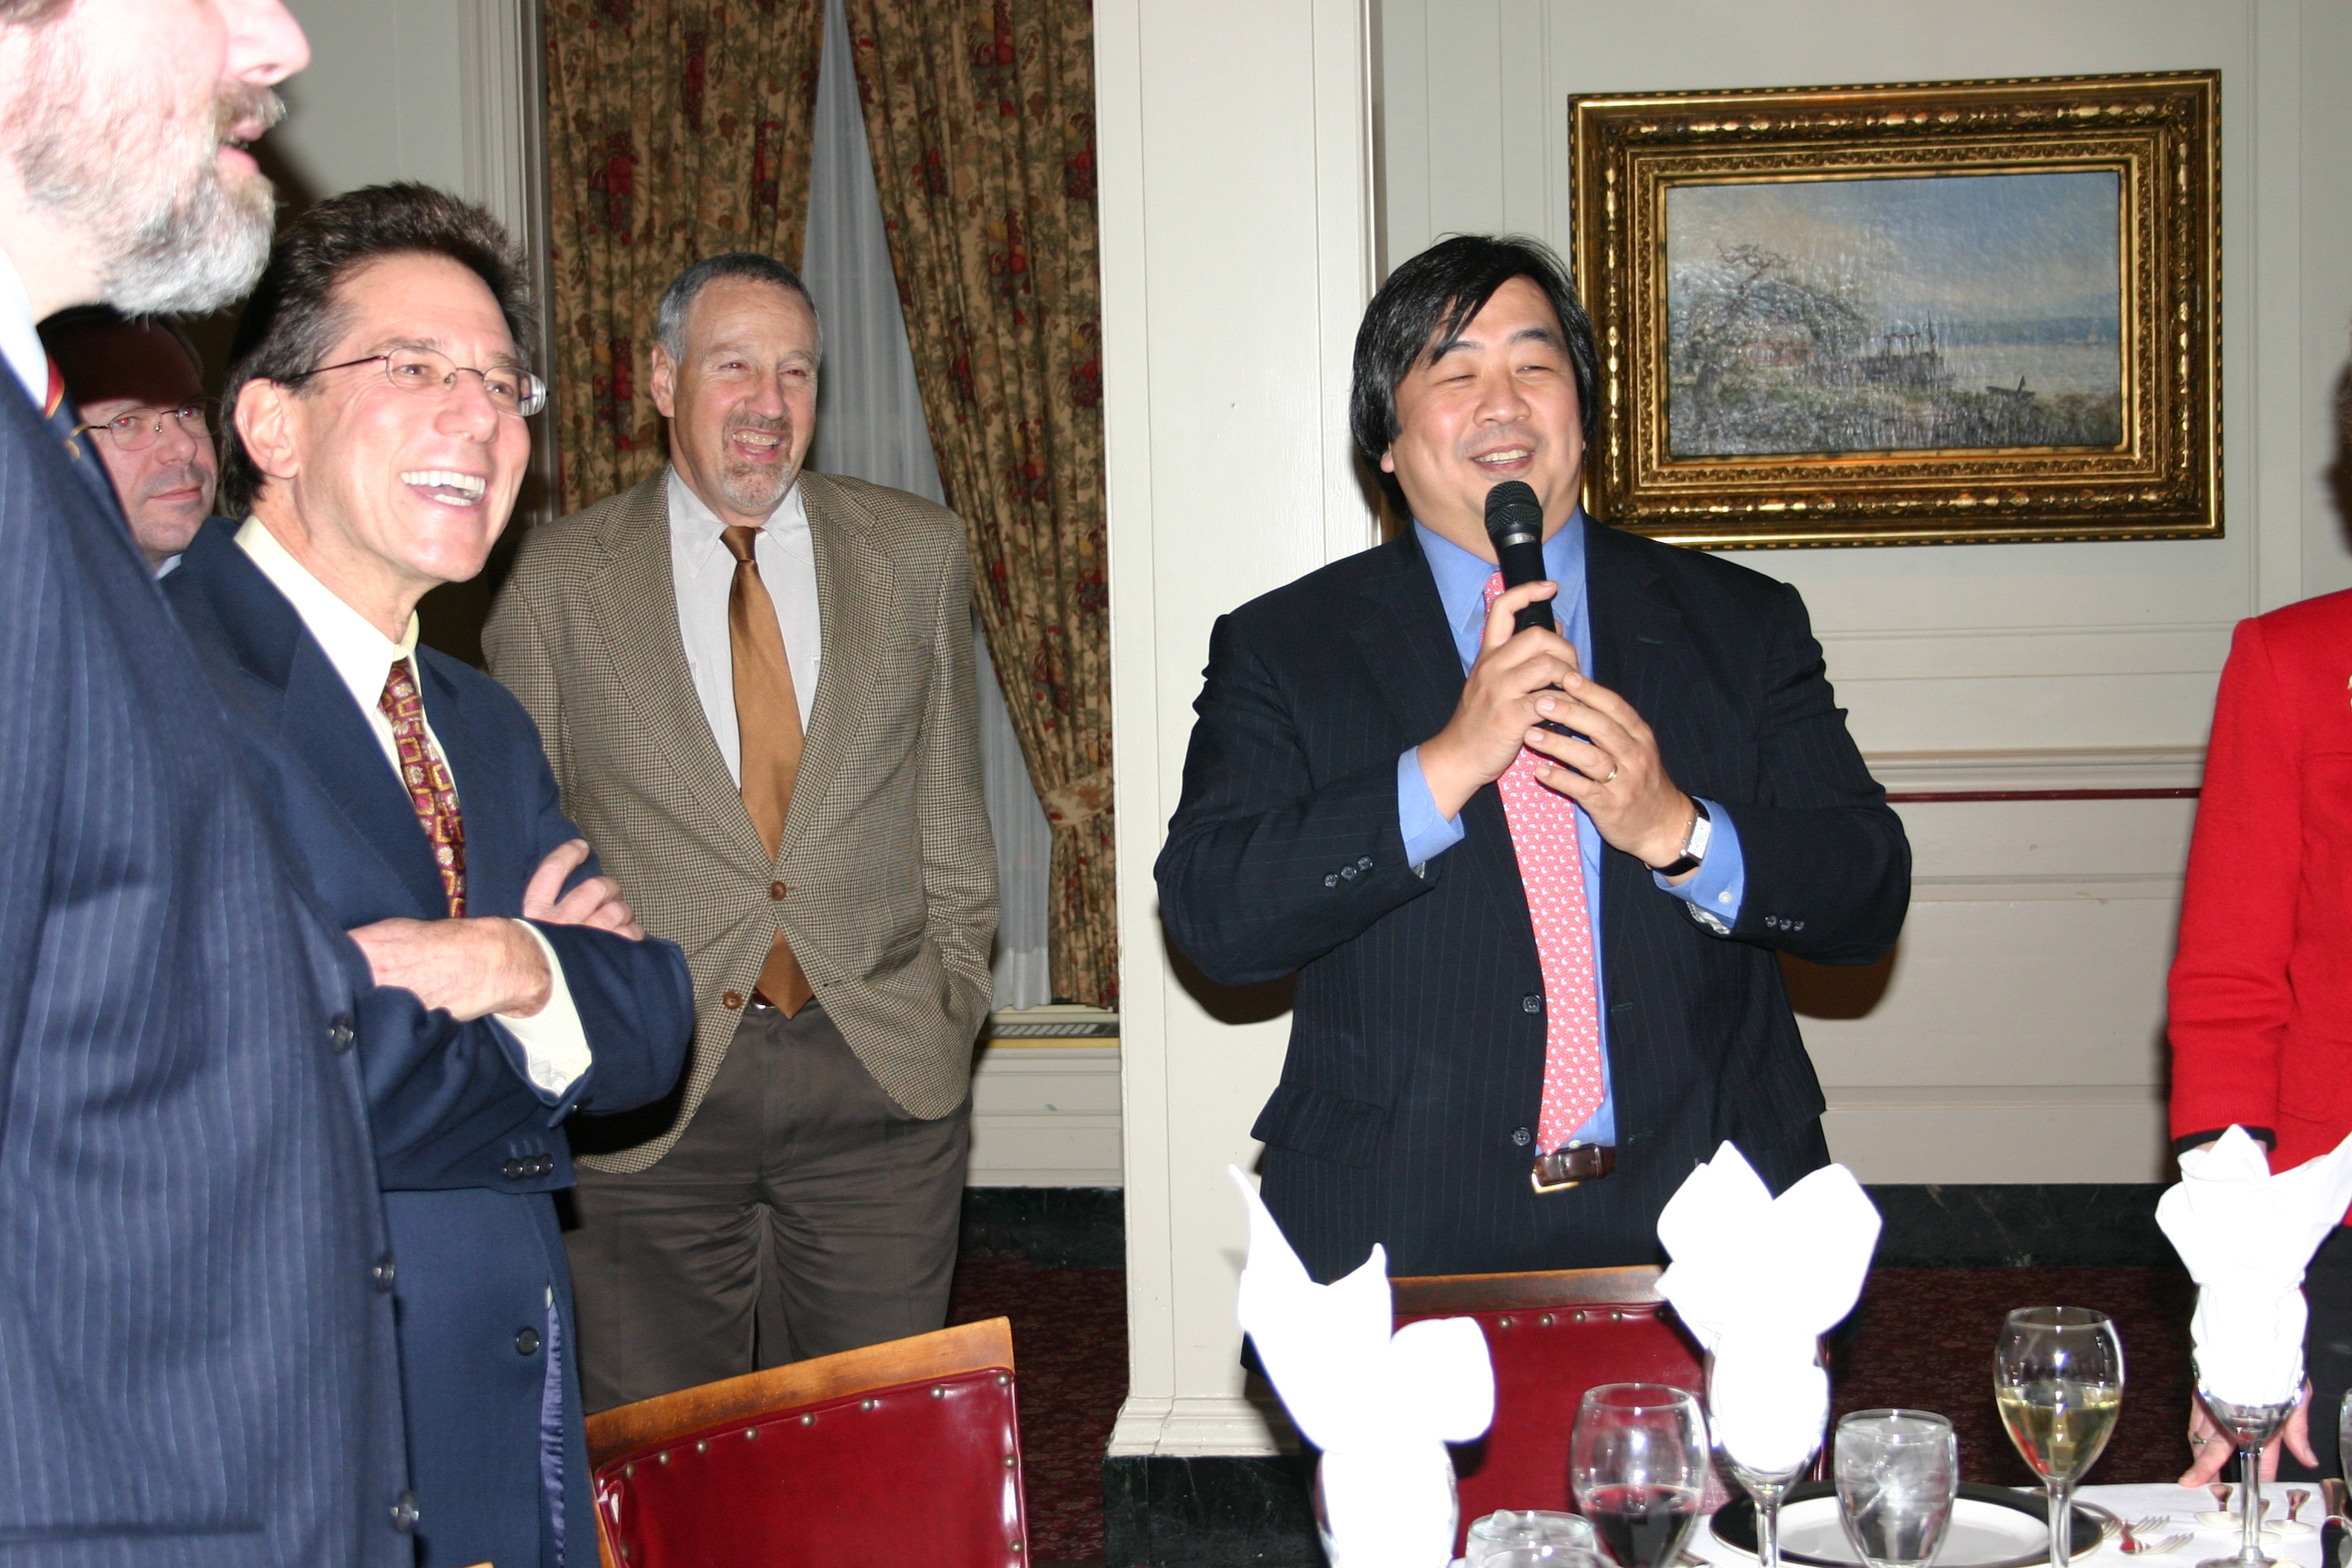 YLS Profs. Anthony Kronman &#039;75 and Peter Schuck and YLS Dean Harold Koh